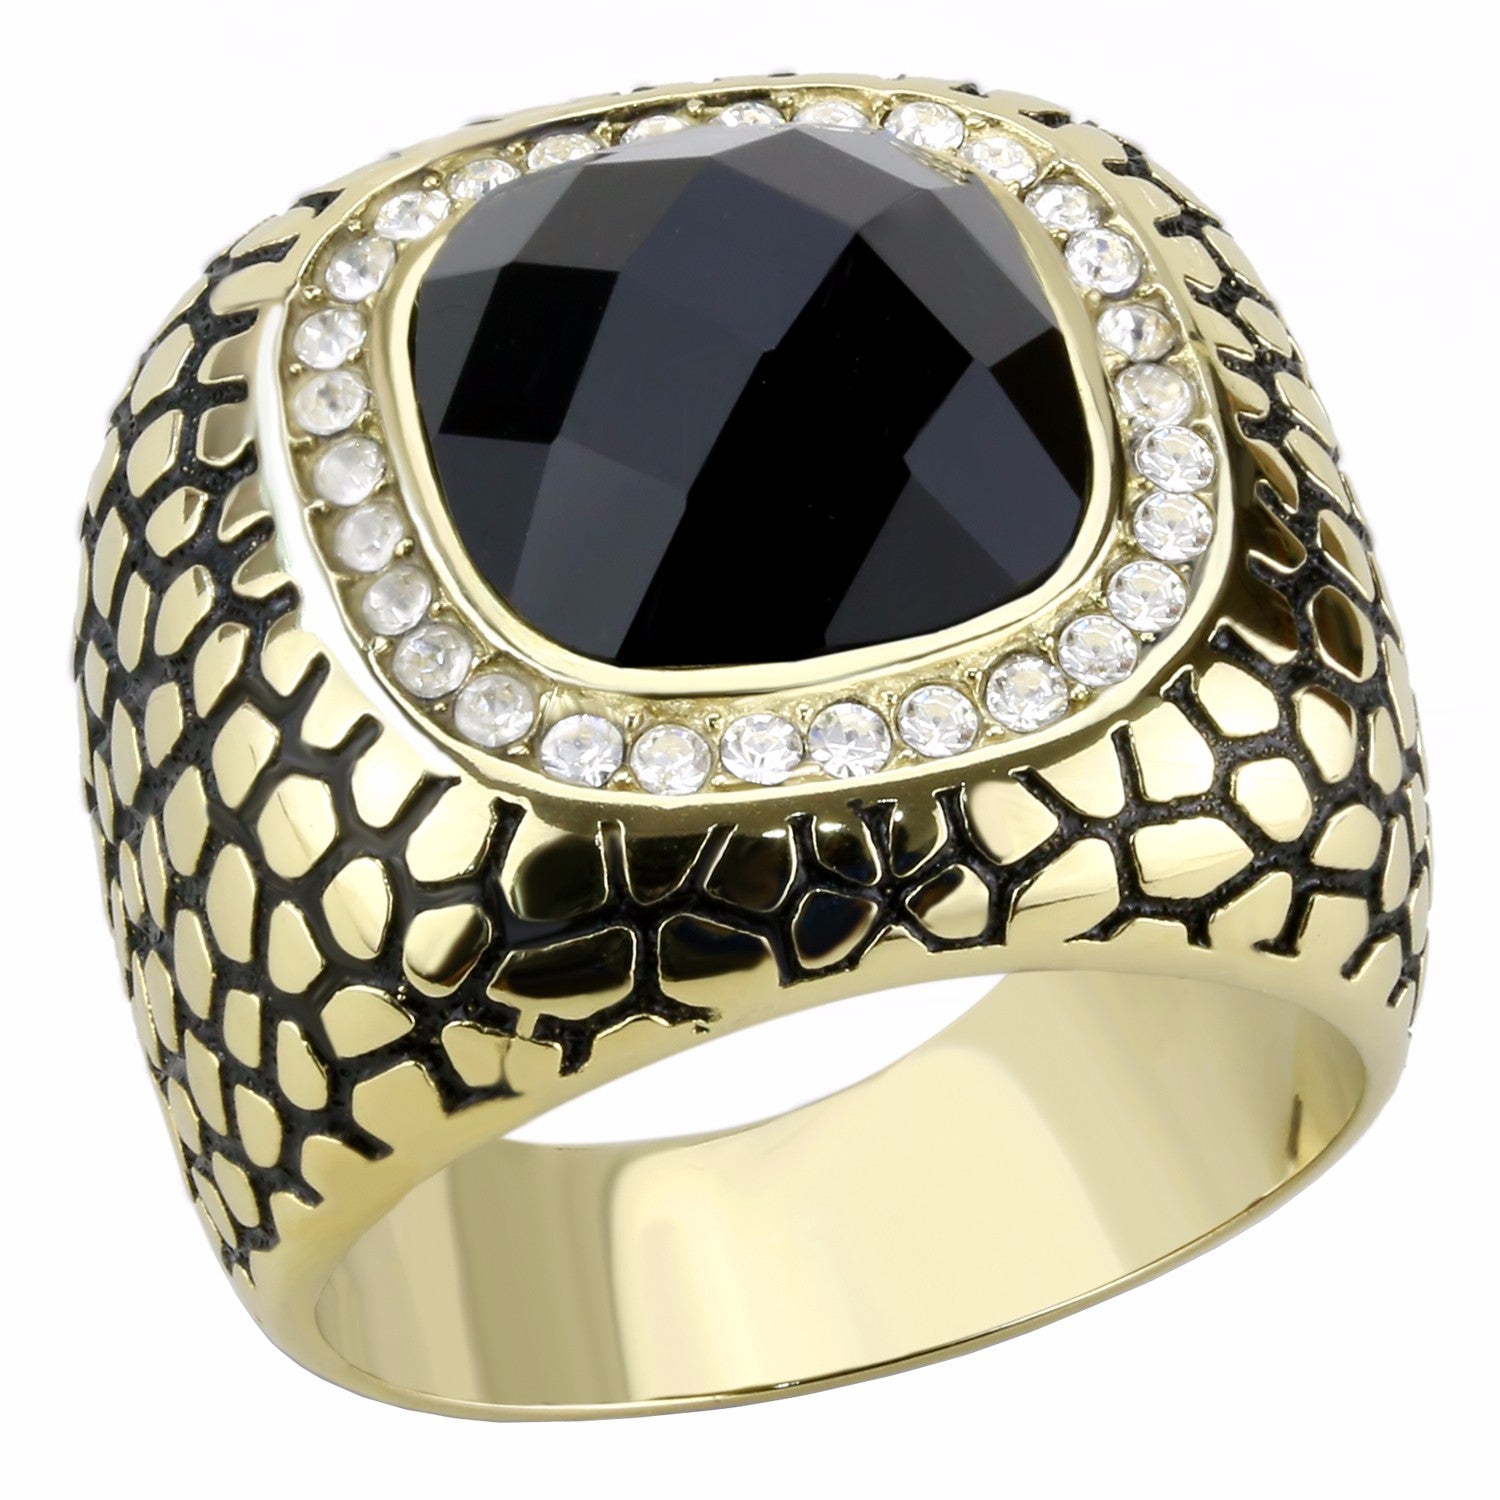 Big 12x12mm Black Synthetic Multiple Cut Stone Gold IP Stainless Steel Ring - LA NY Jewelry